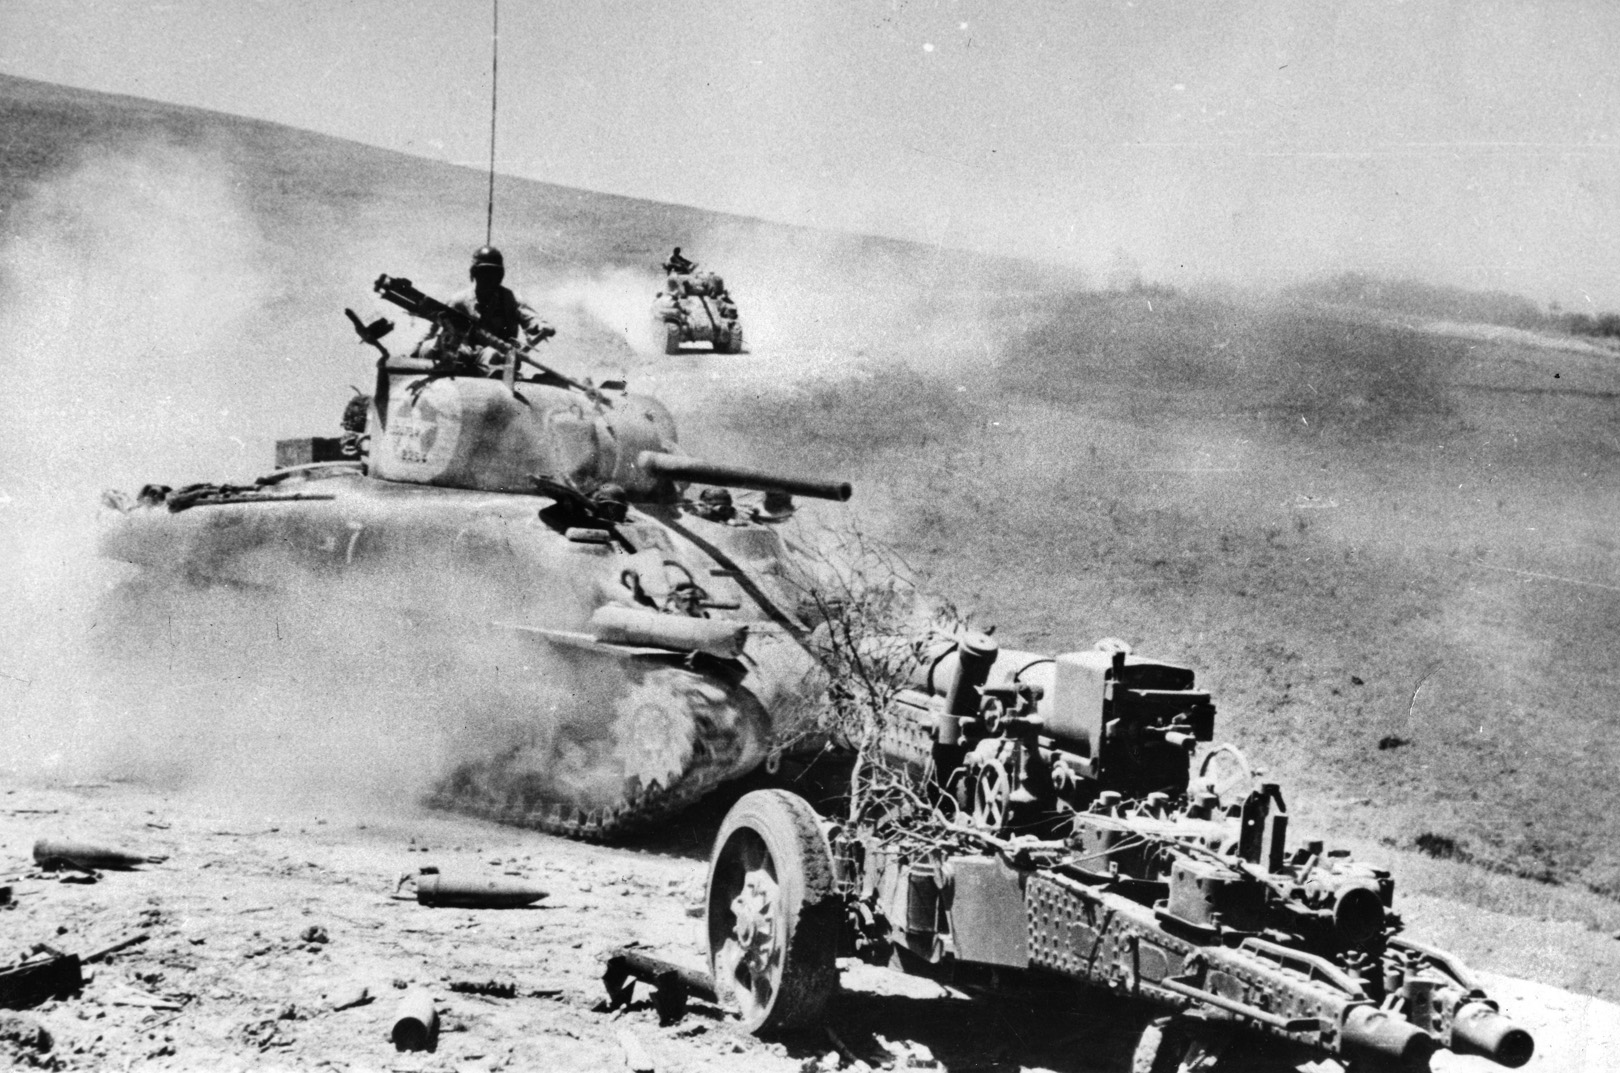 Sherman tanks raise dust on their way to Palermo, rolling past an abandoned Italian 149/19 field piece. The Italians had little stomach for the fight, leaving much of the defense of Sicily to the Germans.